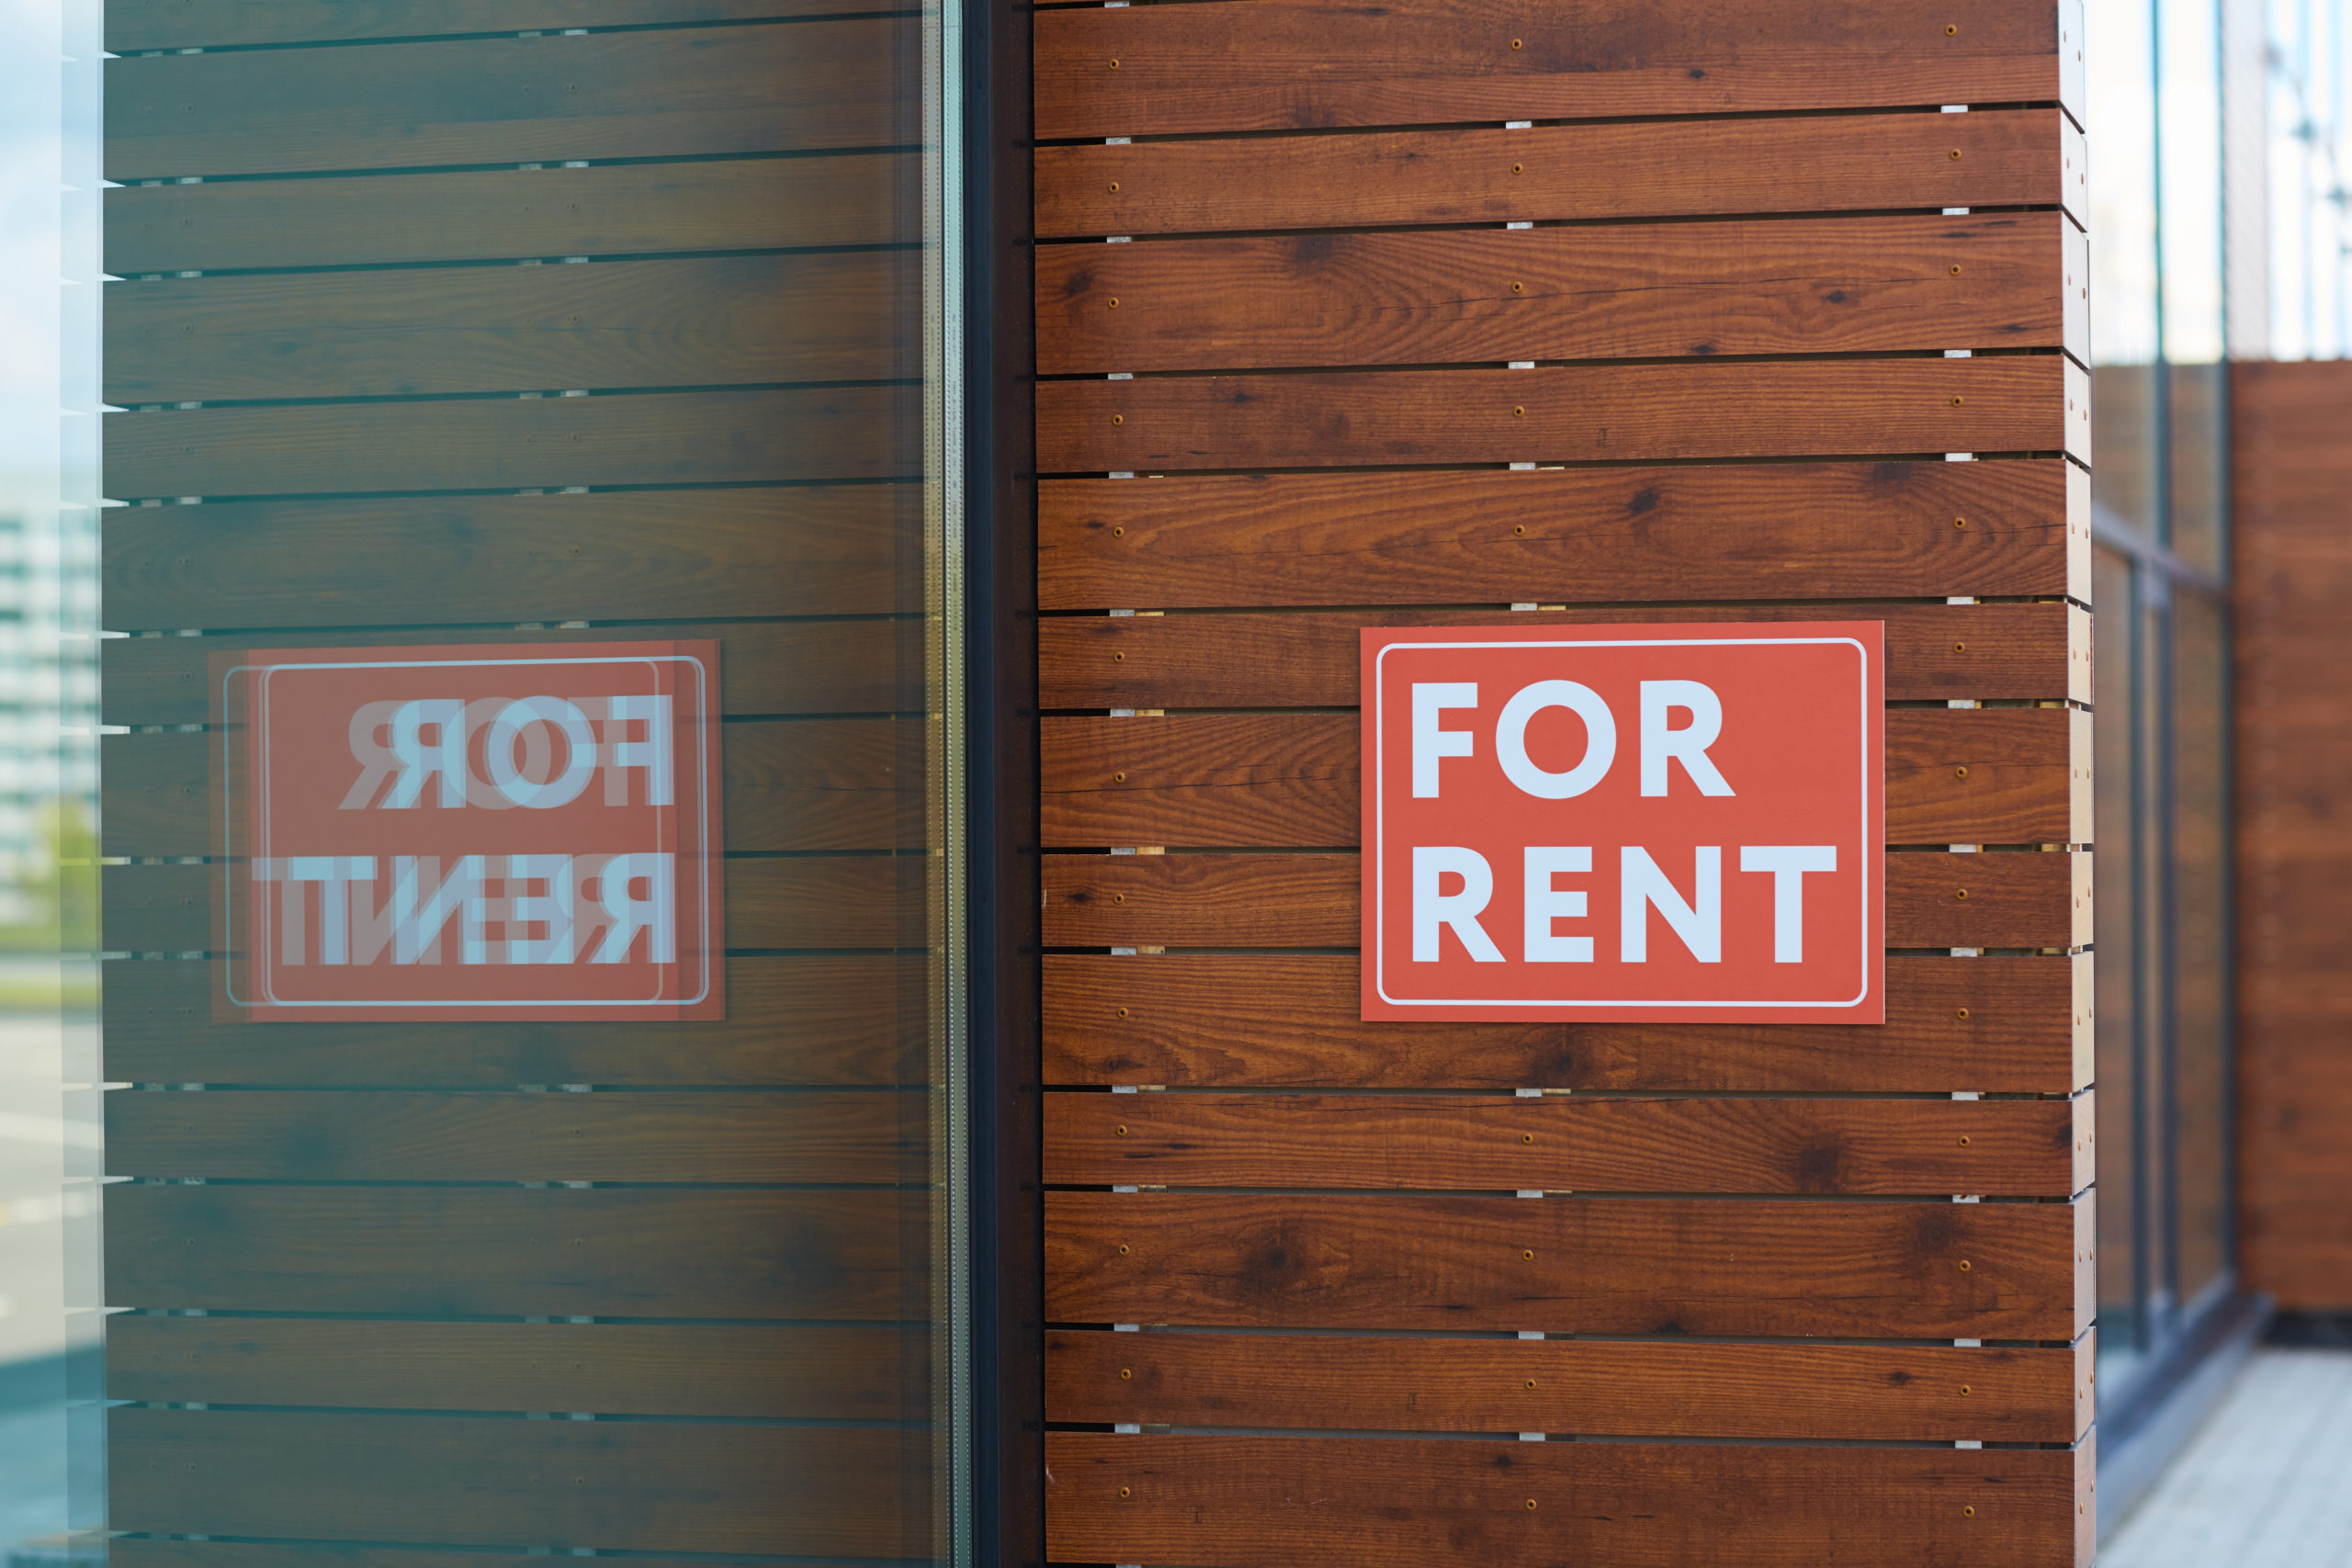 For rent. For rent в ряд. House for rent wanted sign. Property for rent wanted sign. New rent